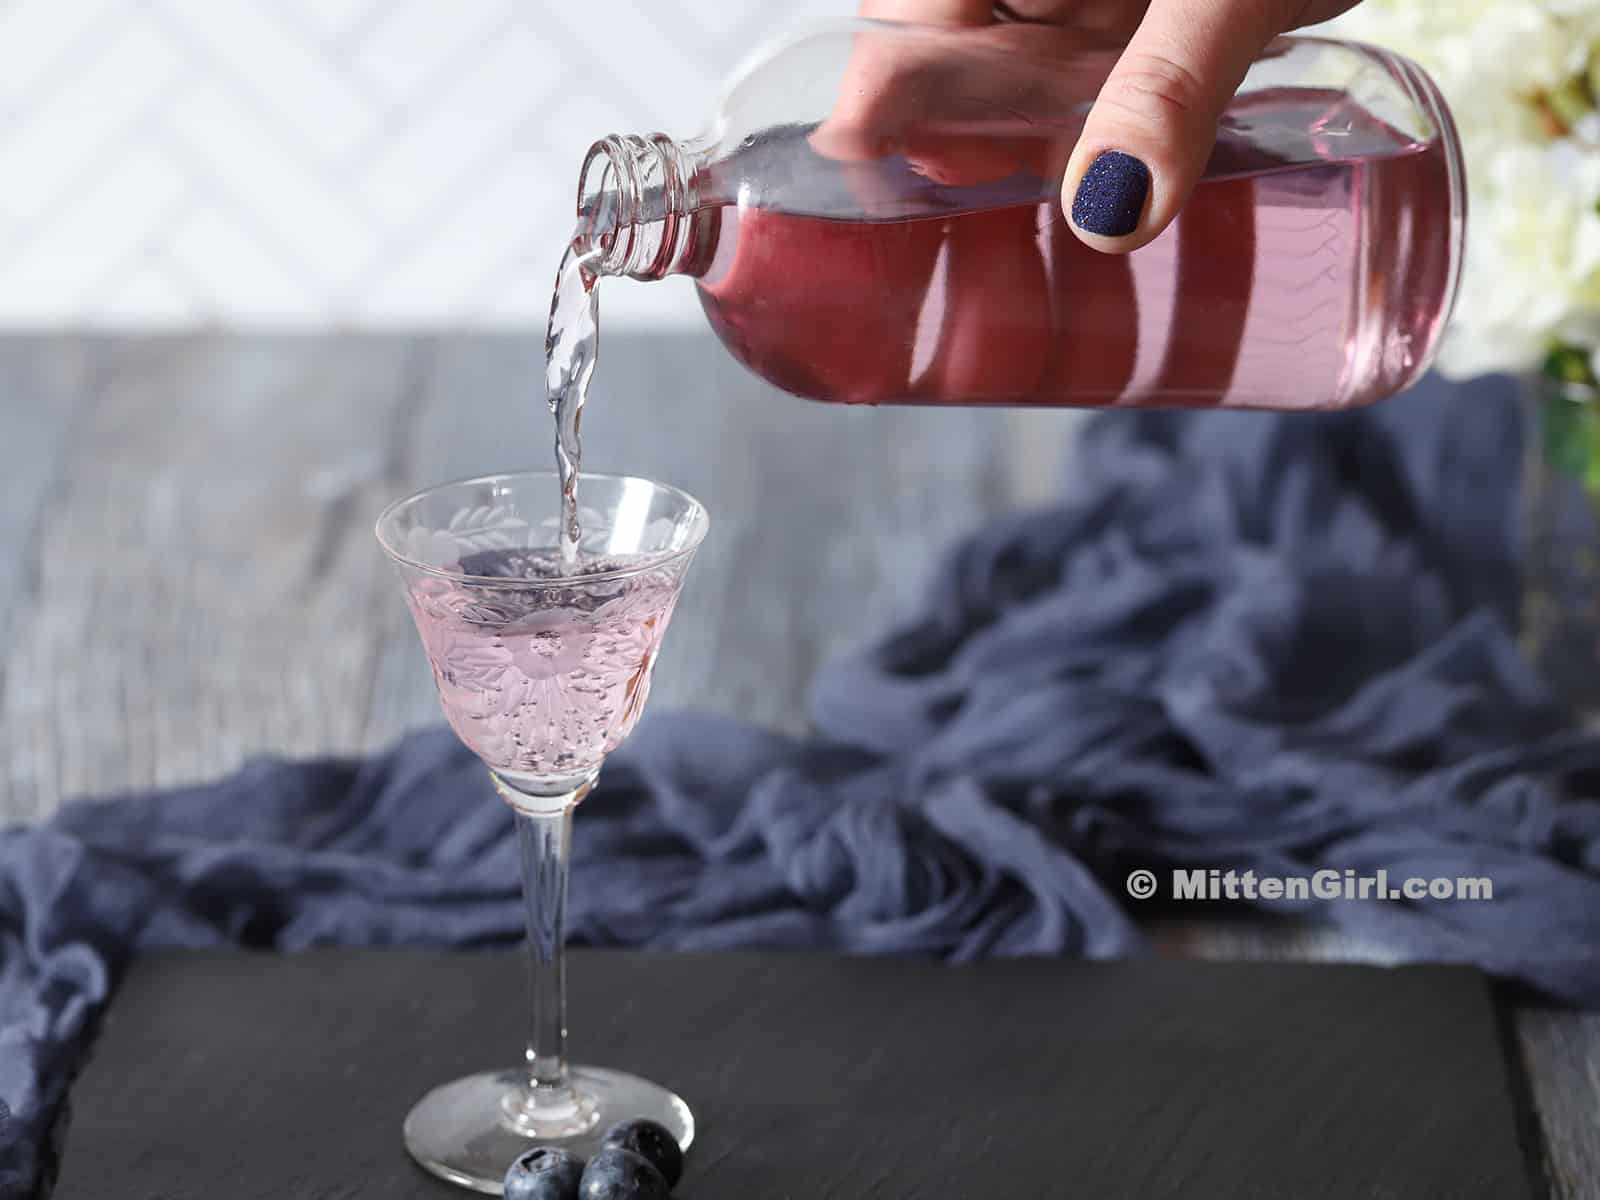 A bottle of blueberry vodka being poured into a small glass.